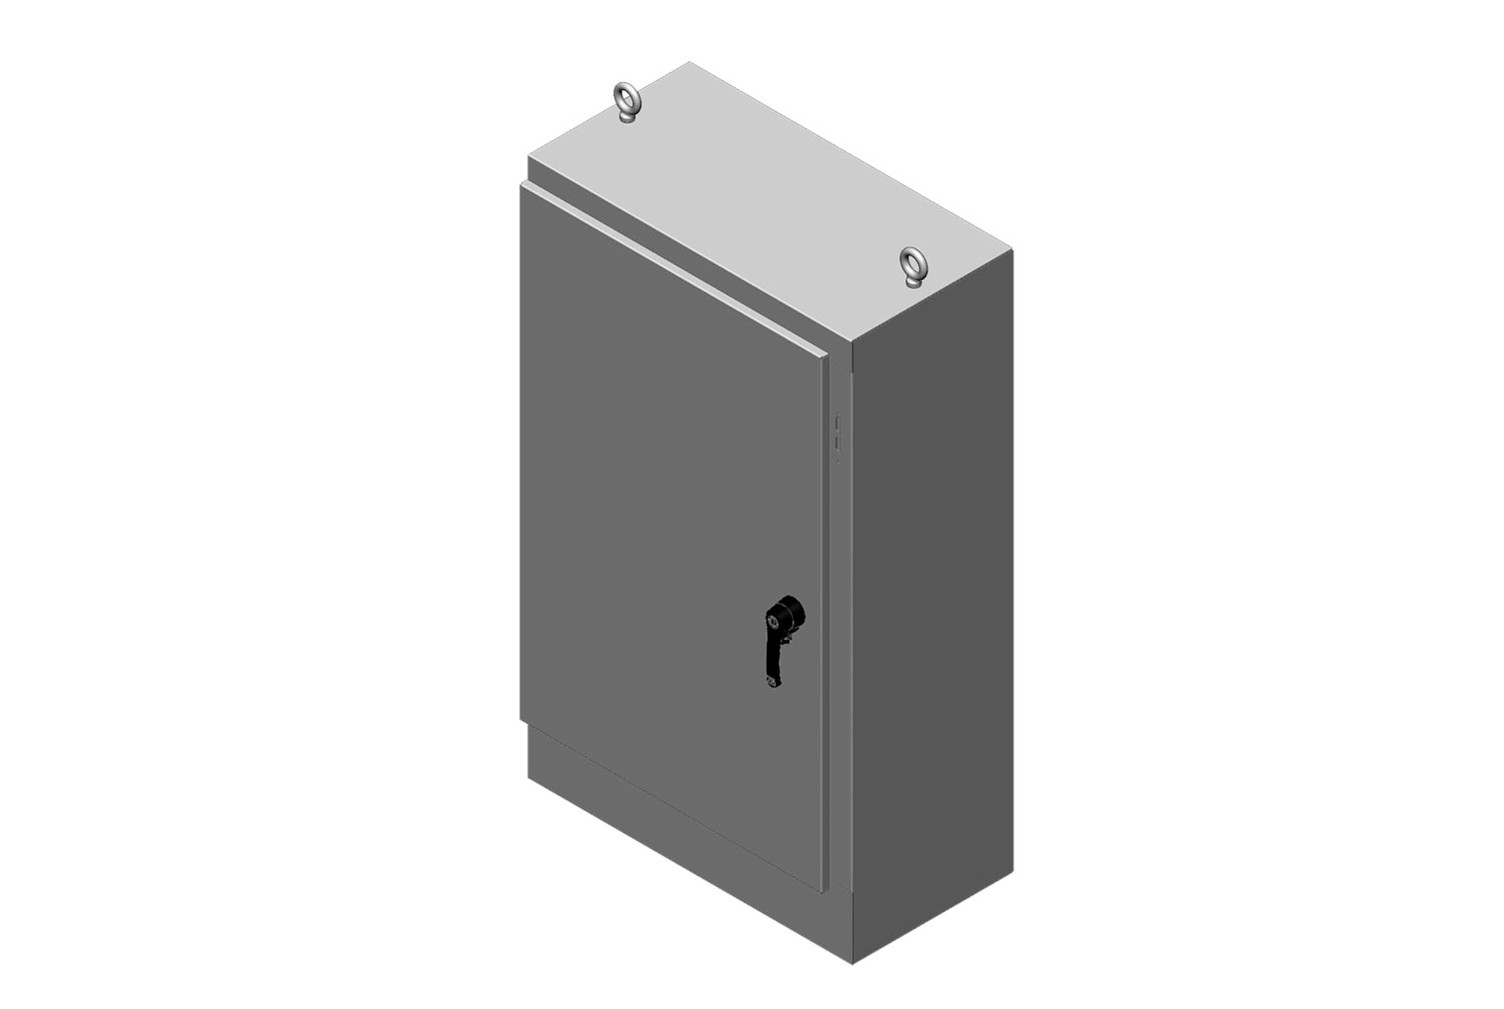 RMR Free-Standing Disconnect Enclosure, Type 4, with Solid Single Door - Image 3